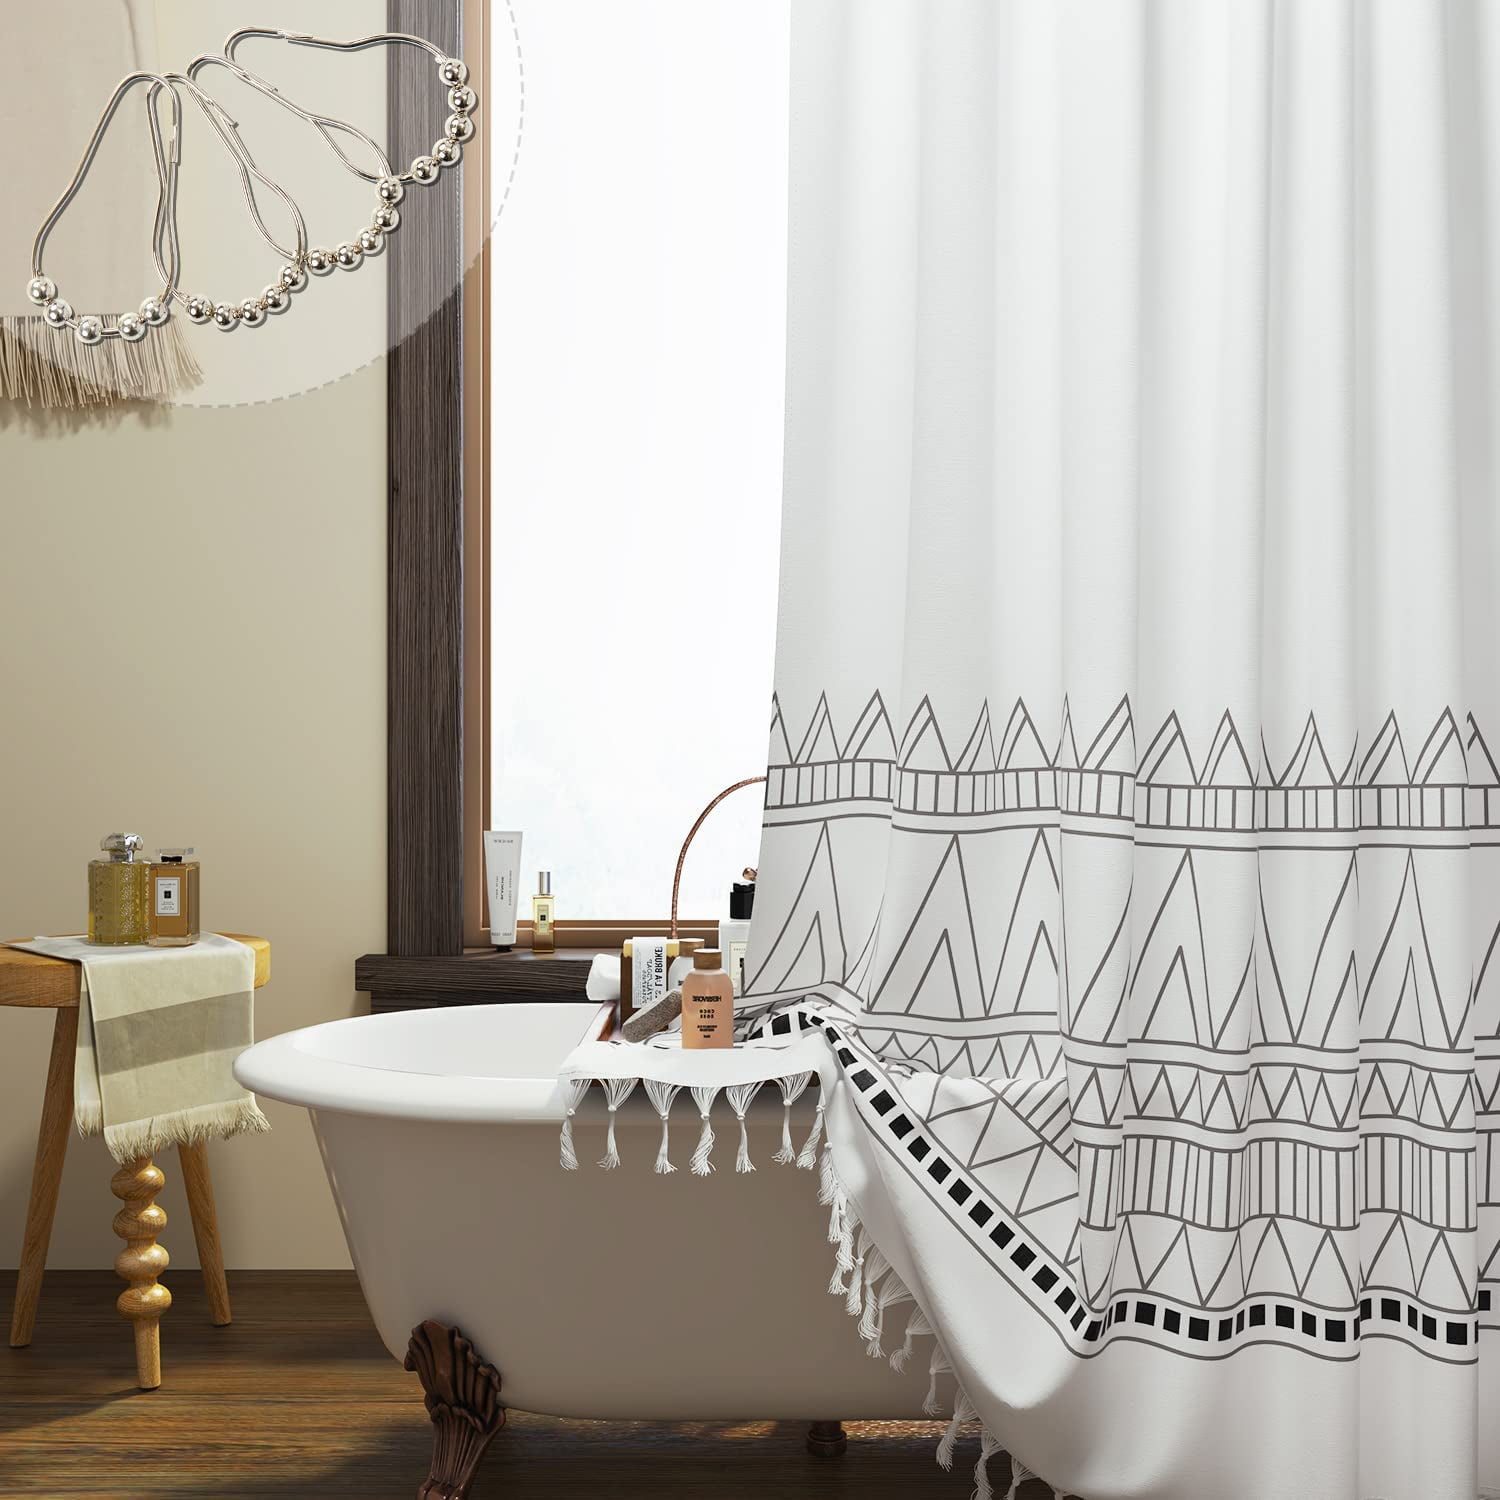  GyiHoong Boho Farmhouse Shower Curtains for Bathroom, Ivory  Long Shower Curtain 84 Length Cotton Linen Ultra Thick Shower Curtains with  Tassel Decorative Shower Curtain with 12 Hooks, Waterproof : Home & Kitchen